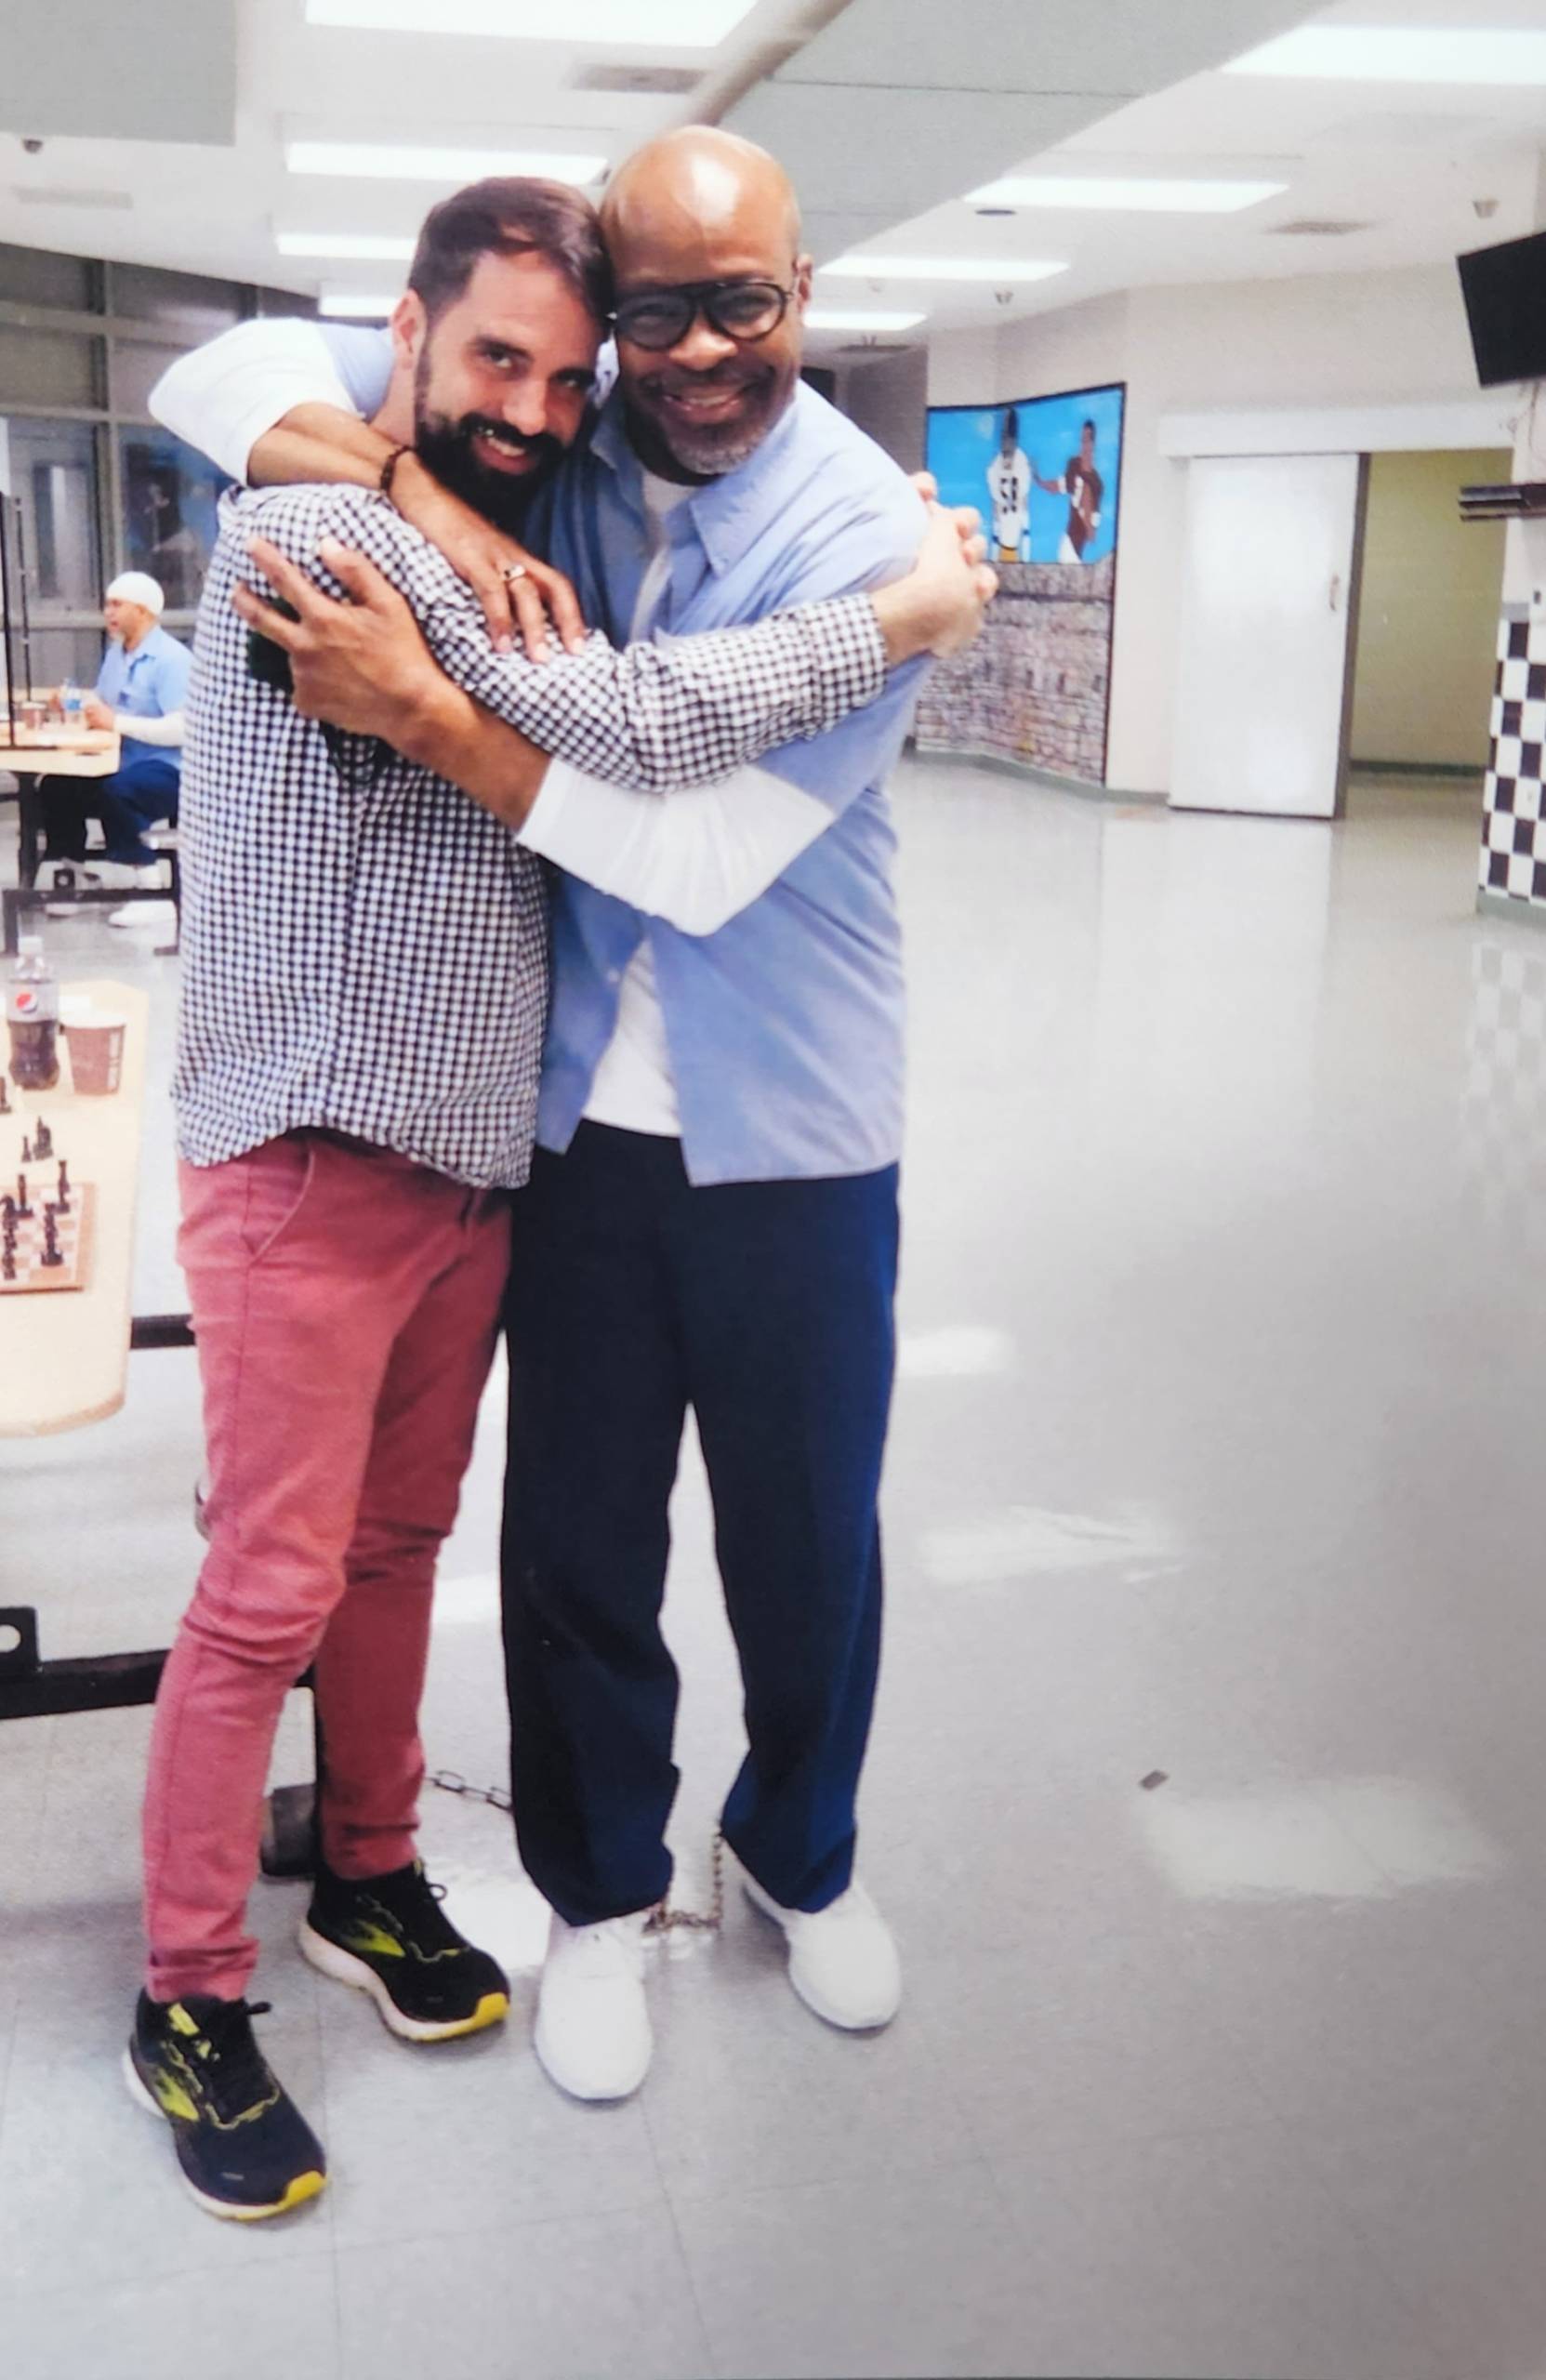 A musician visiting from the outside and an incarcerated poet hug inside a prison.